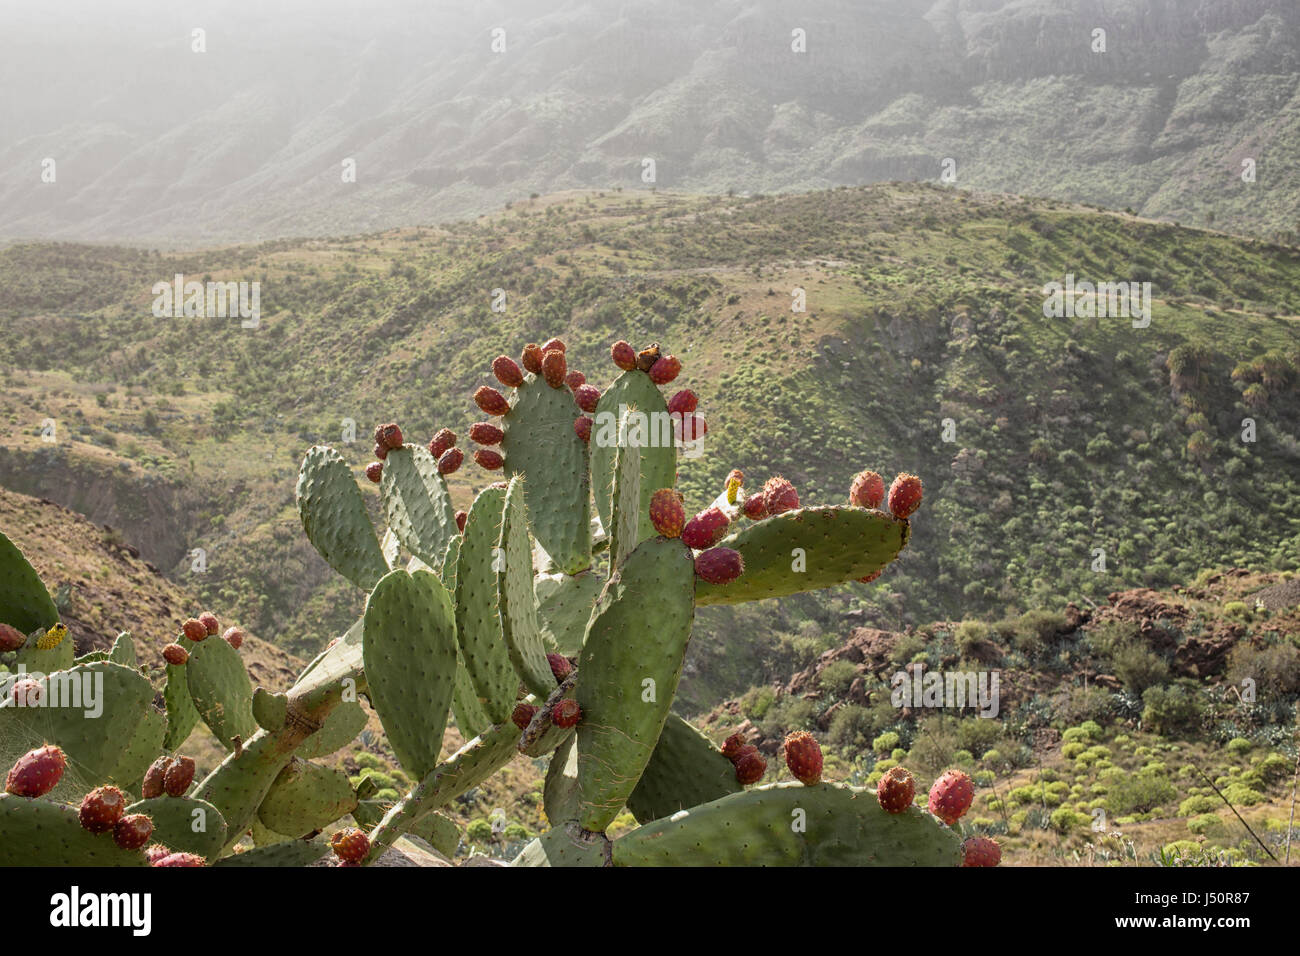 chumbera nopal cactus plant with red flowers Stock Photo